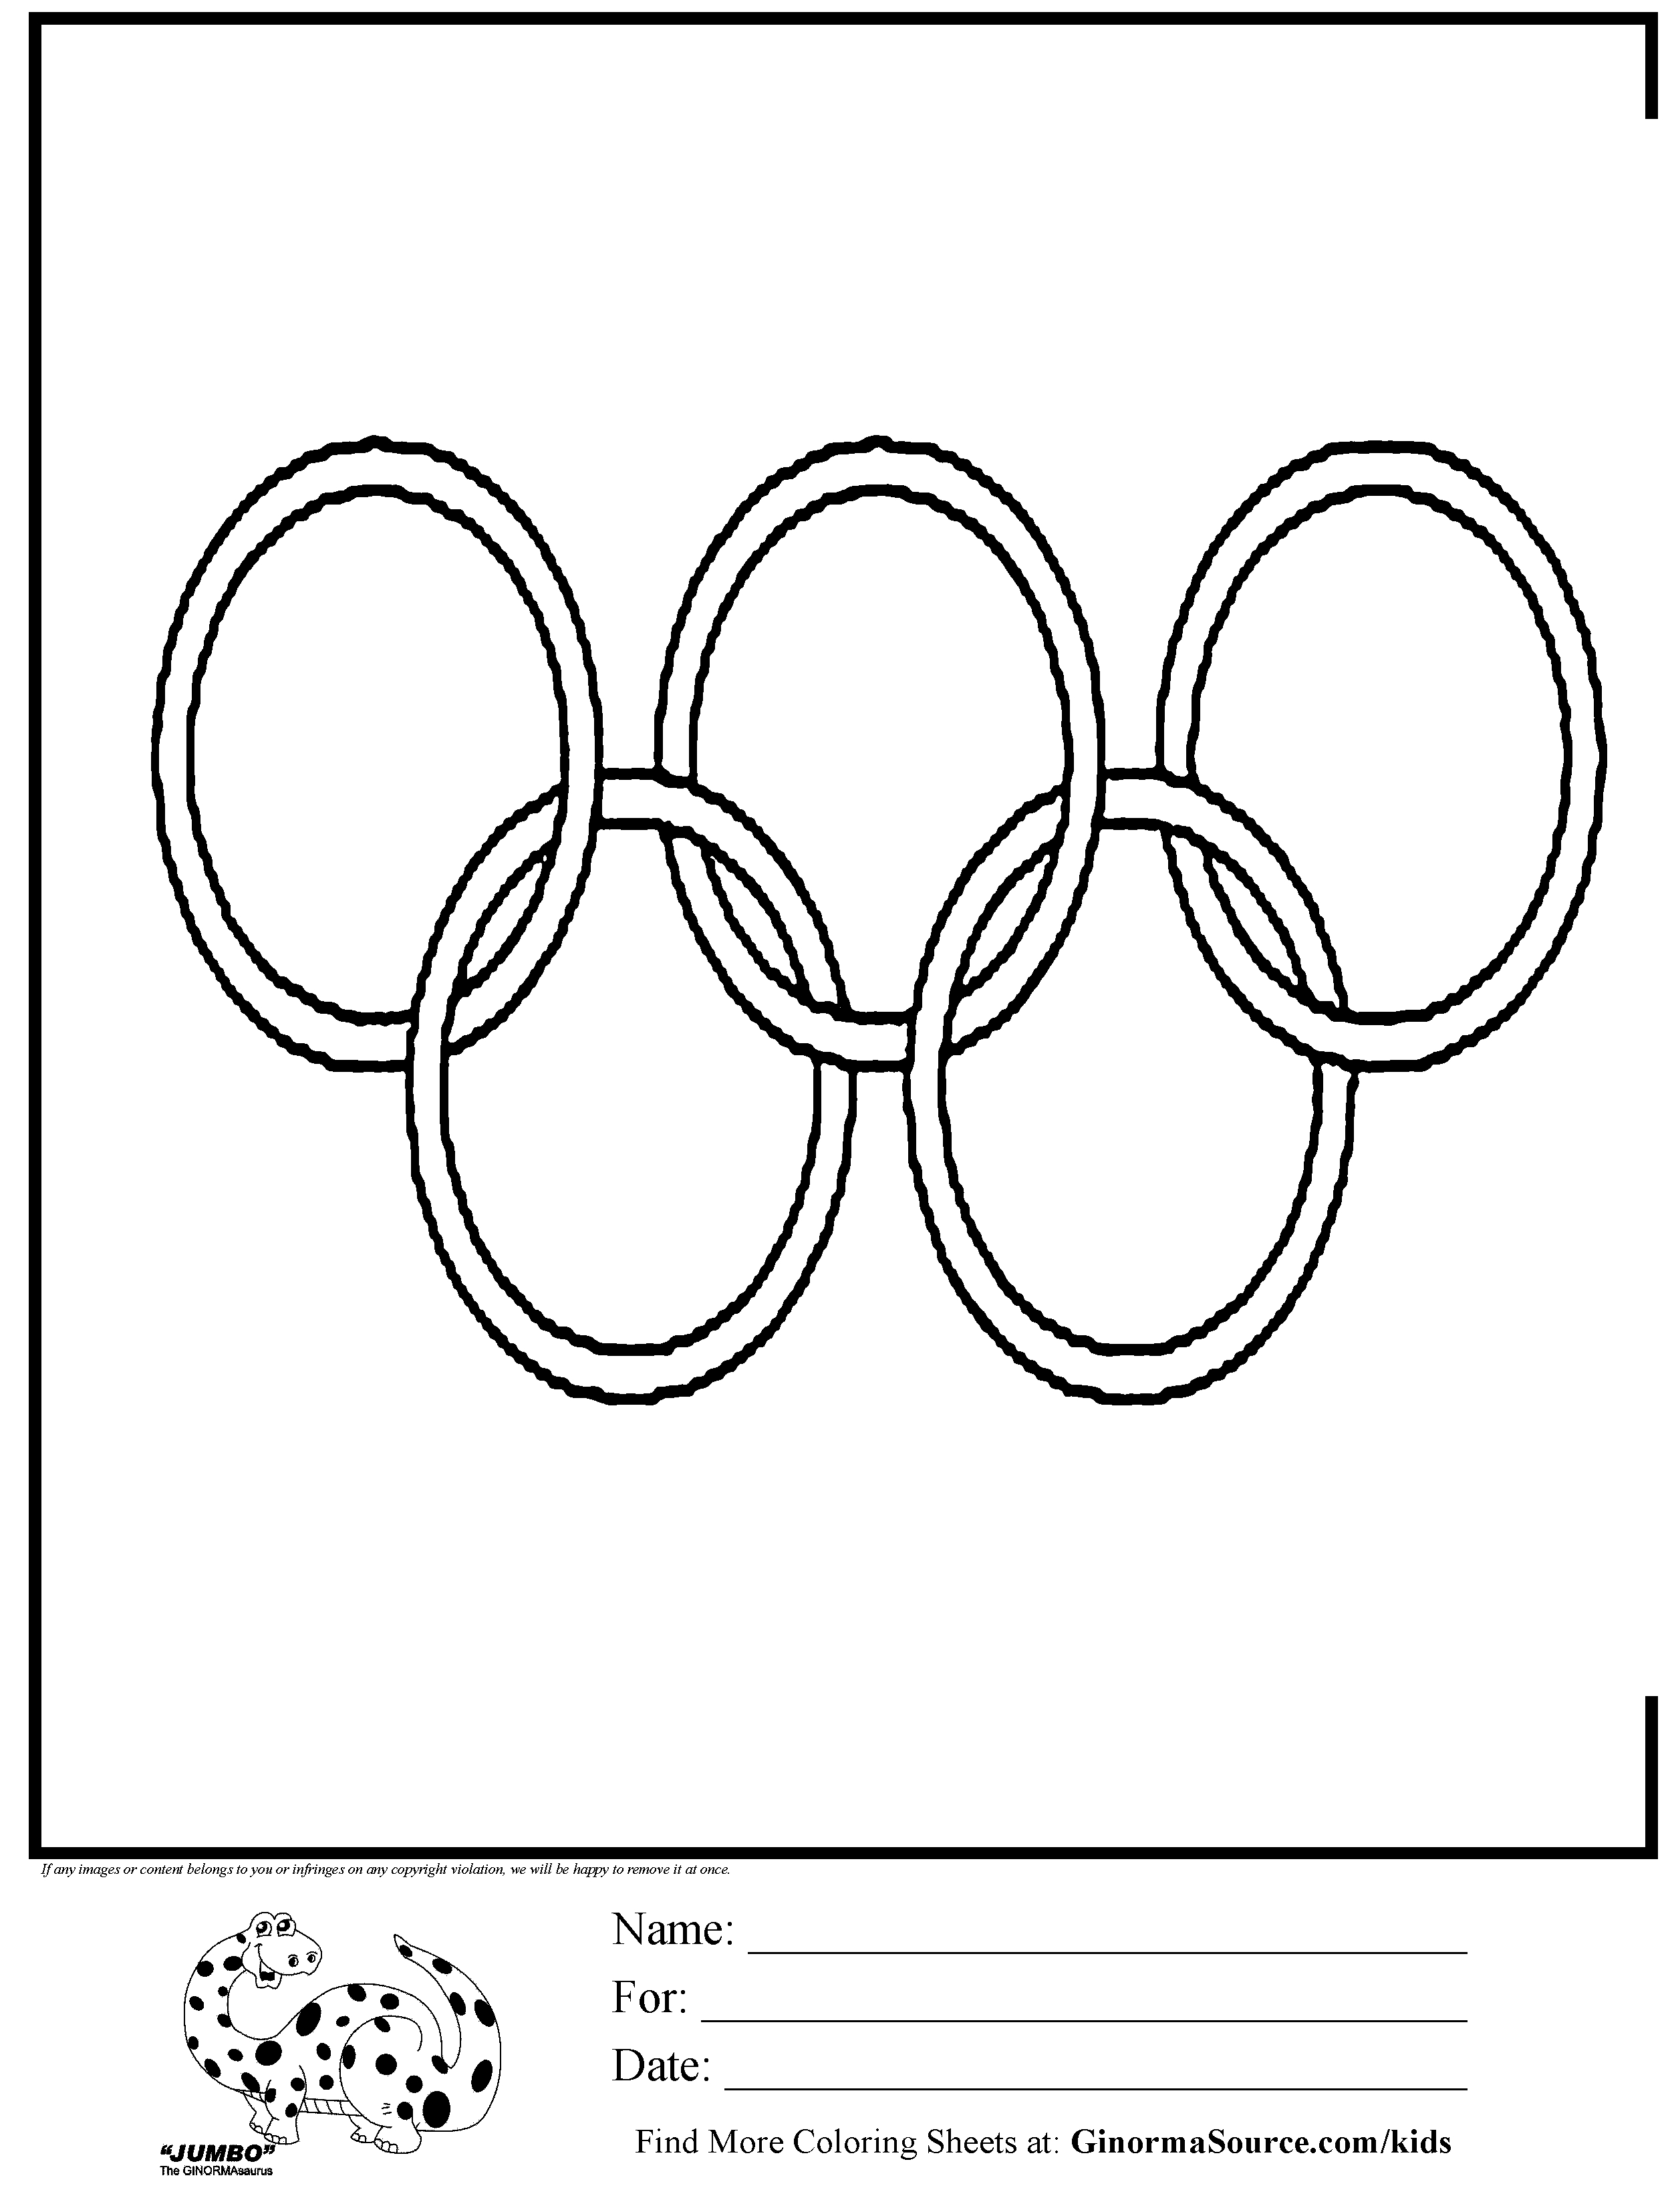 Coloring the perfect rings of the olympic games